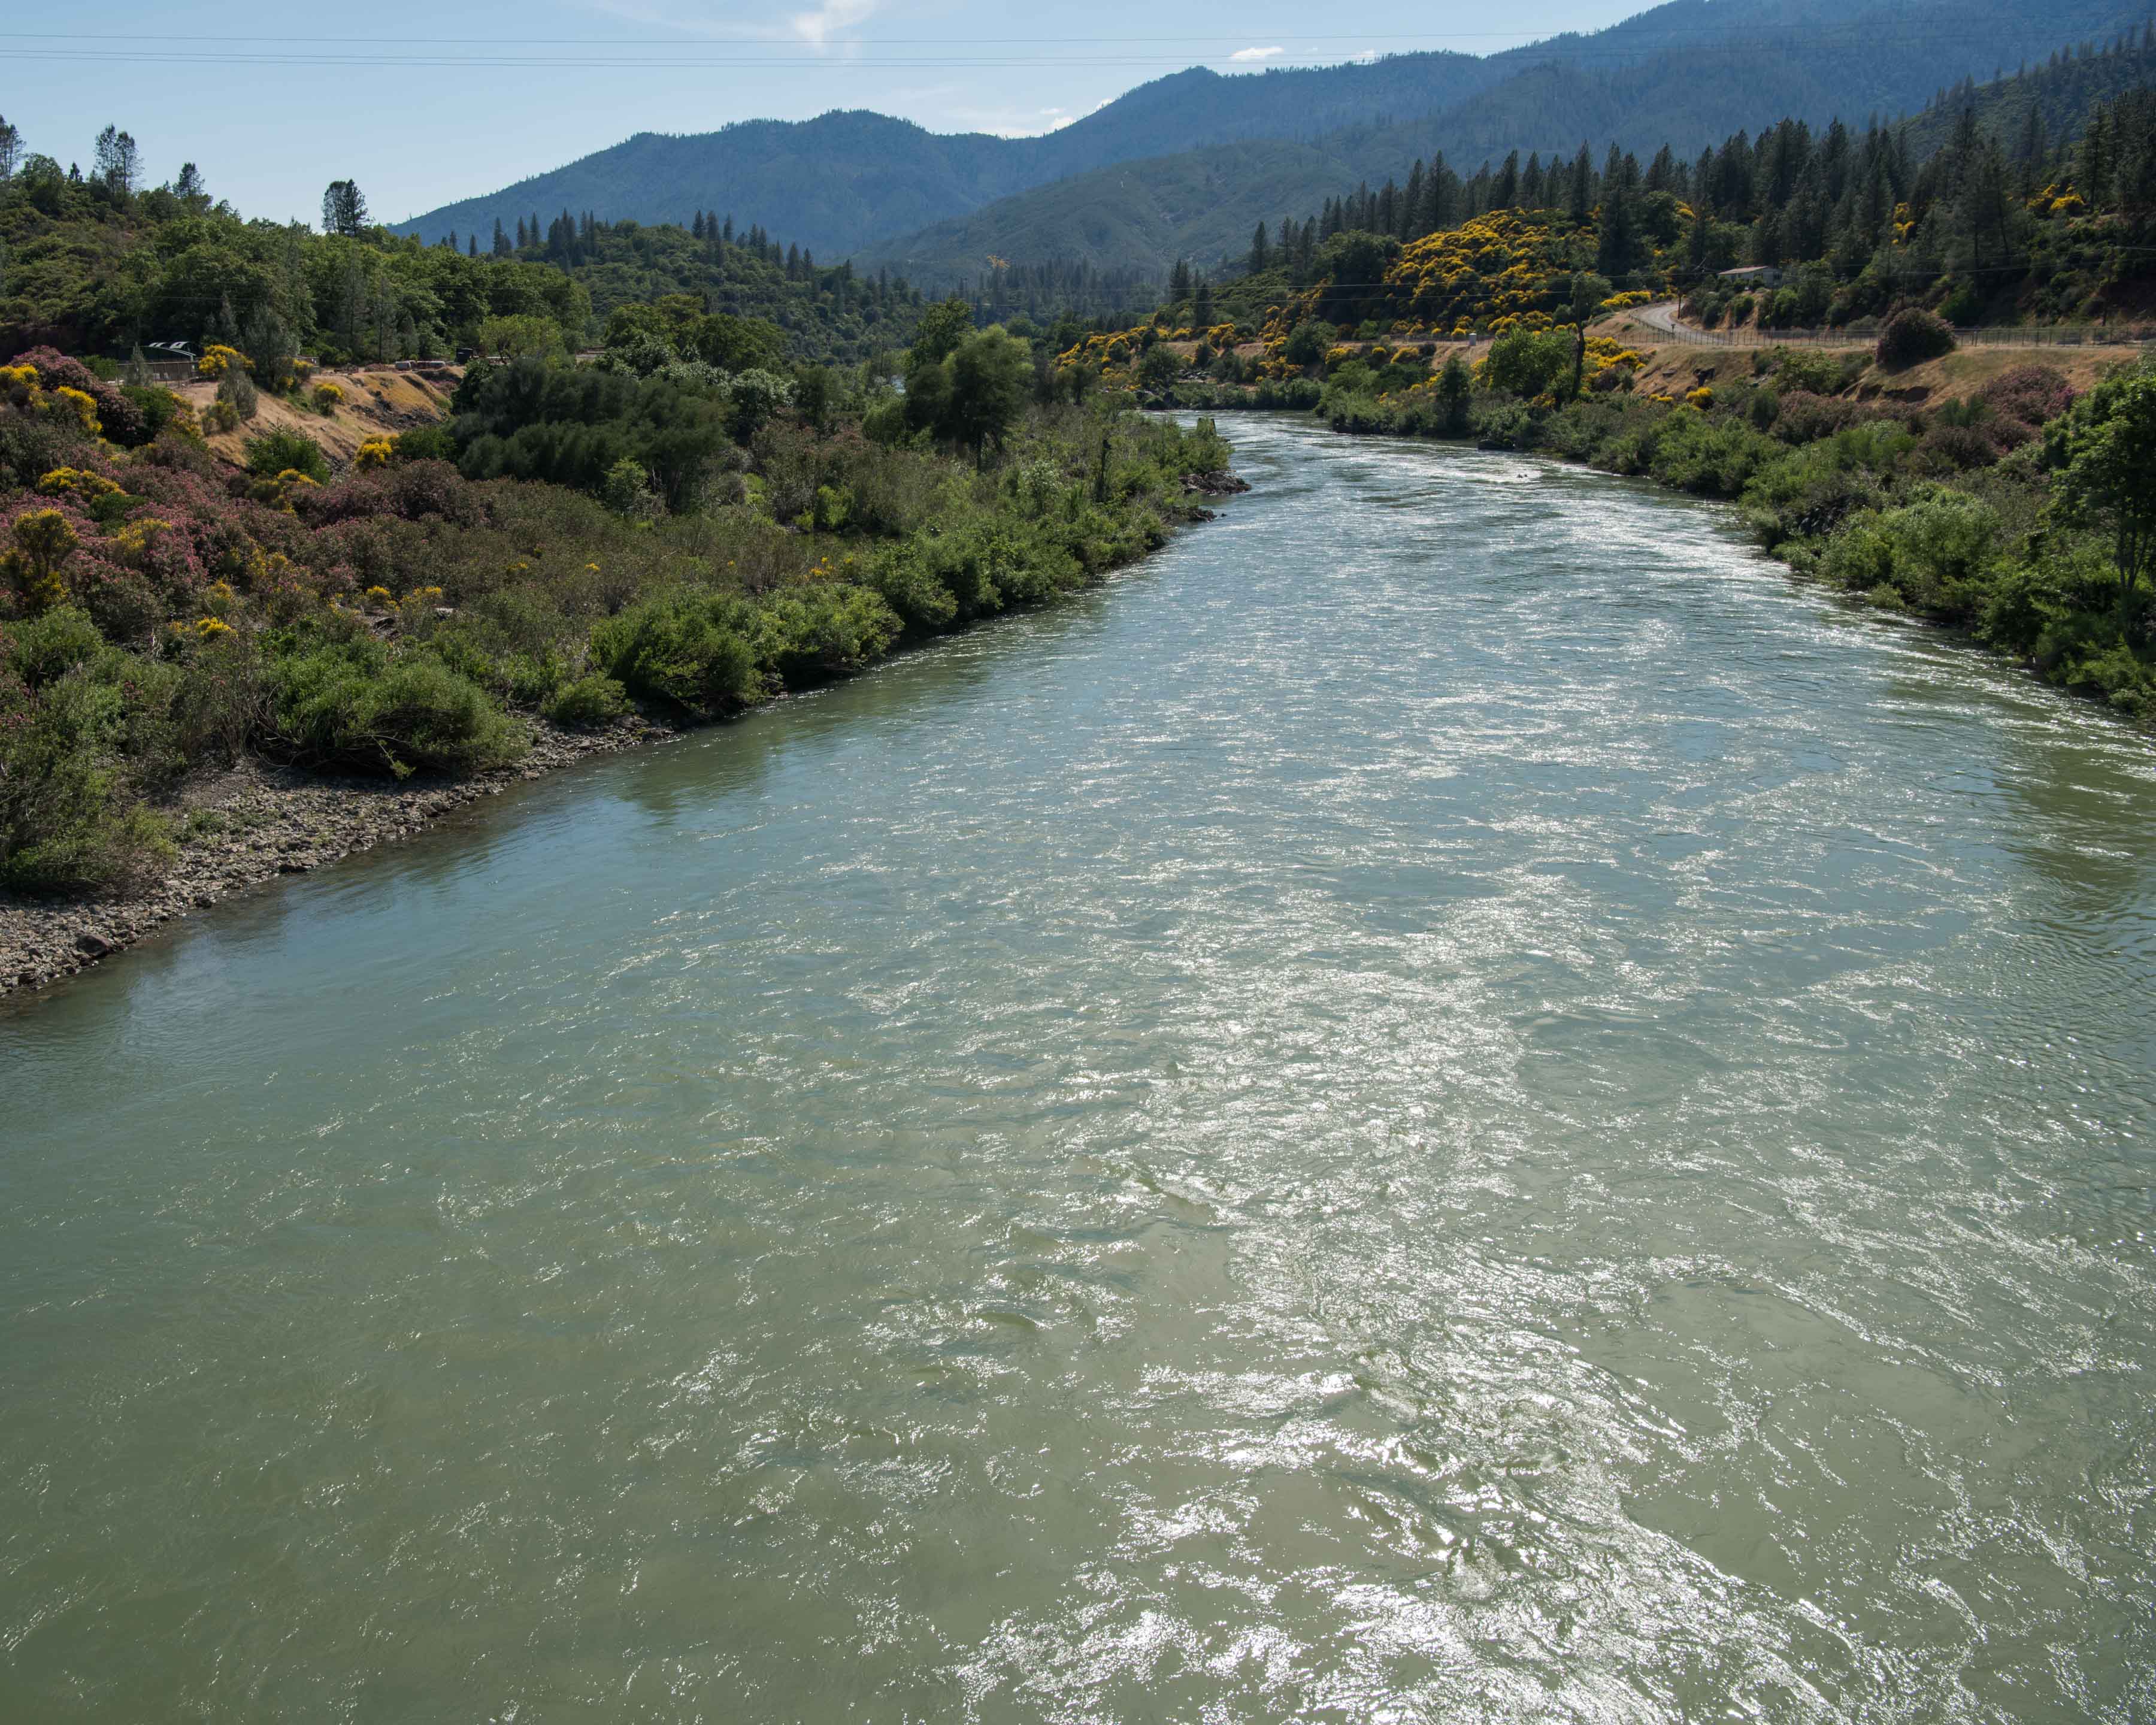 The Central Valley Project in California will receive $61.8 million to address ongoing drought needs throughout the region. Shown: The Sacramento River below Shasta Dam in Northern California. Photo: Reclamation.